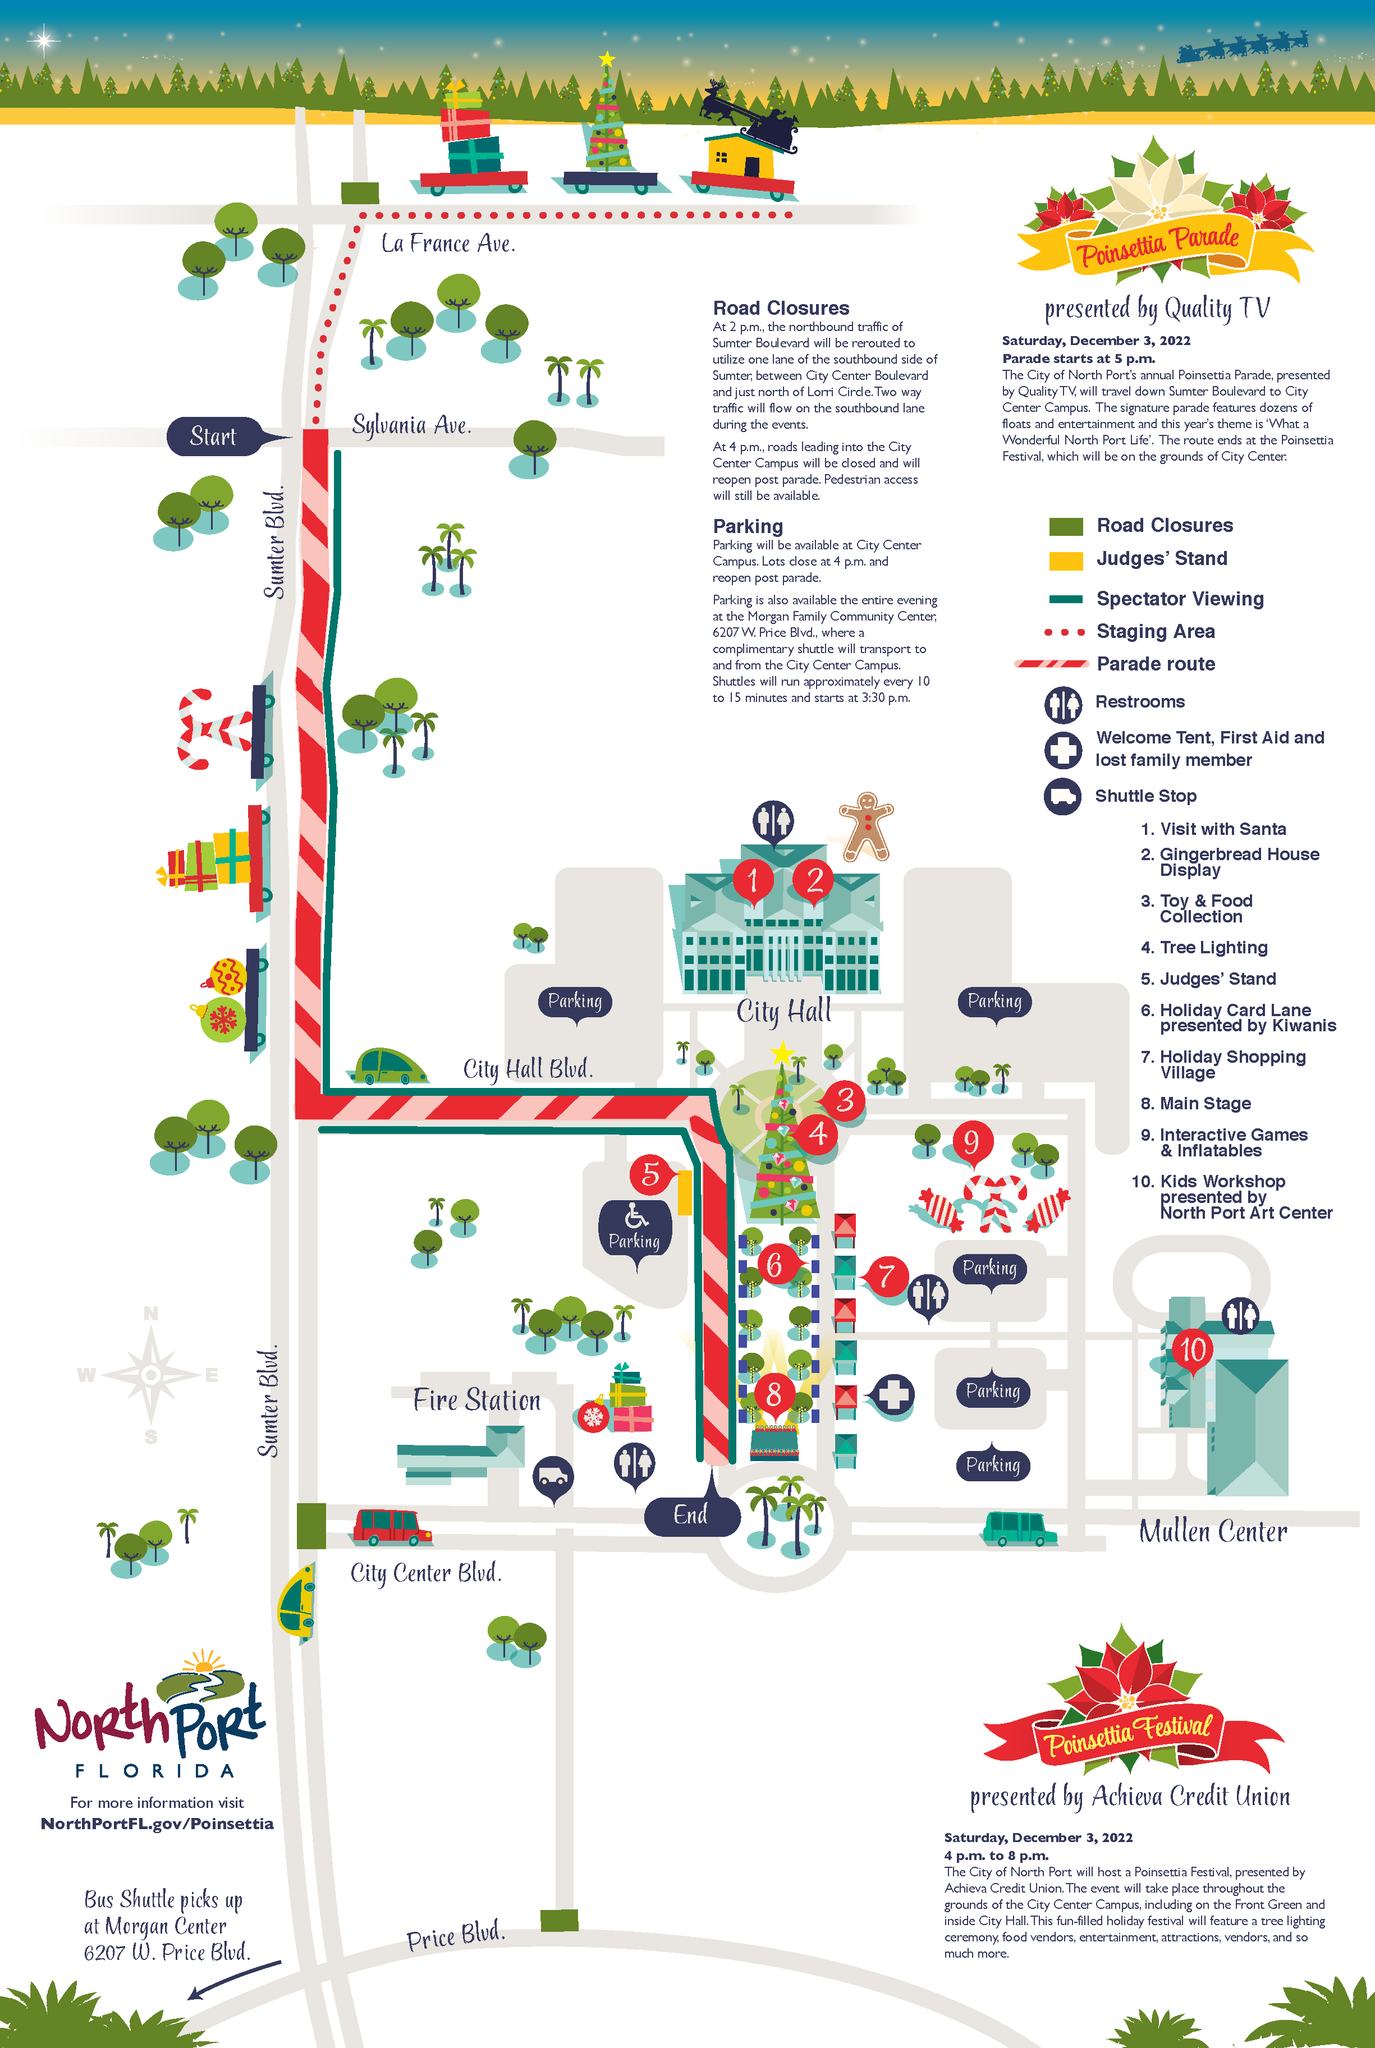 Saturday’s North Port Poinsettia Parade route and information The